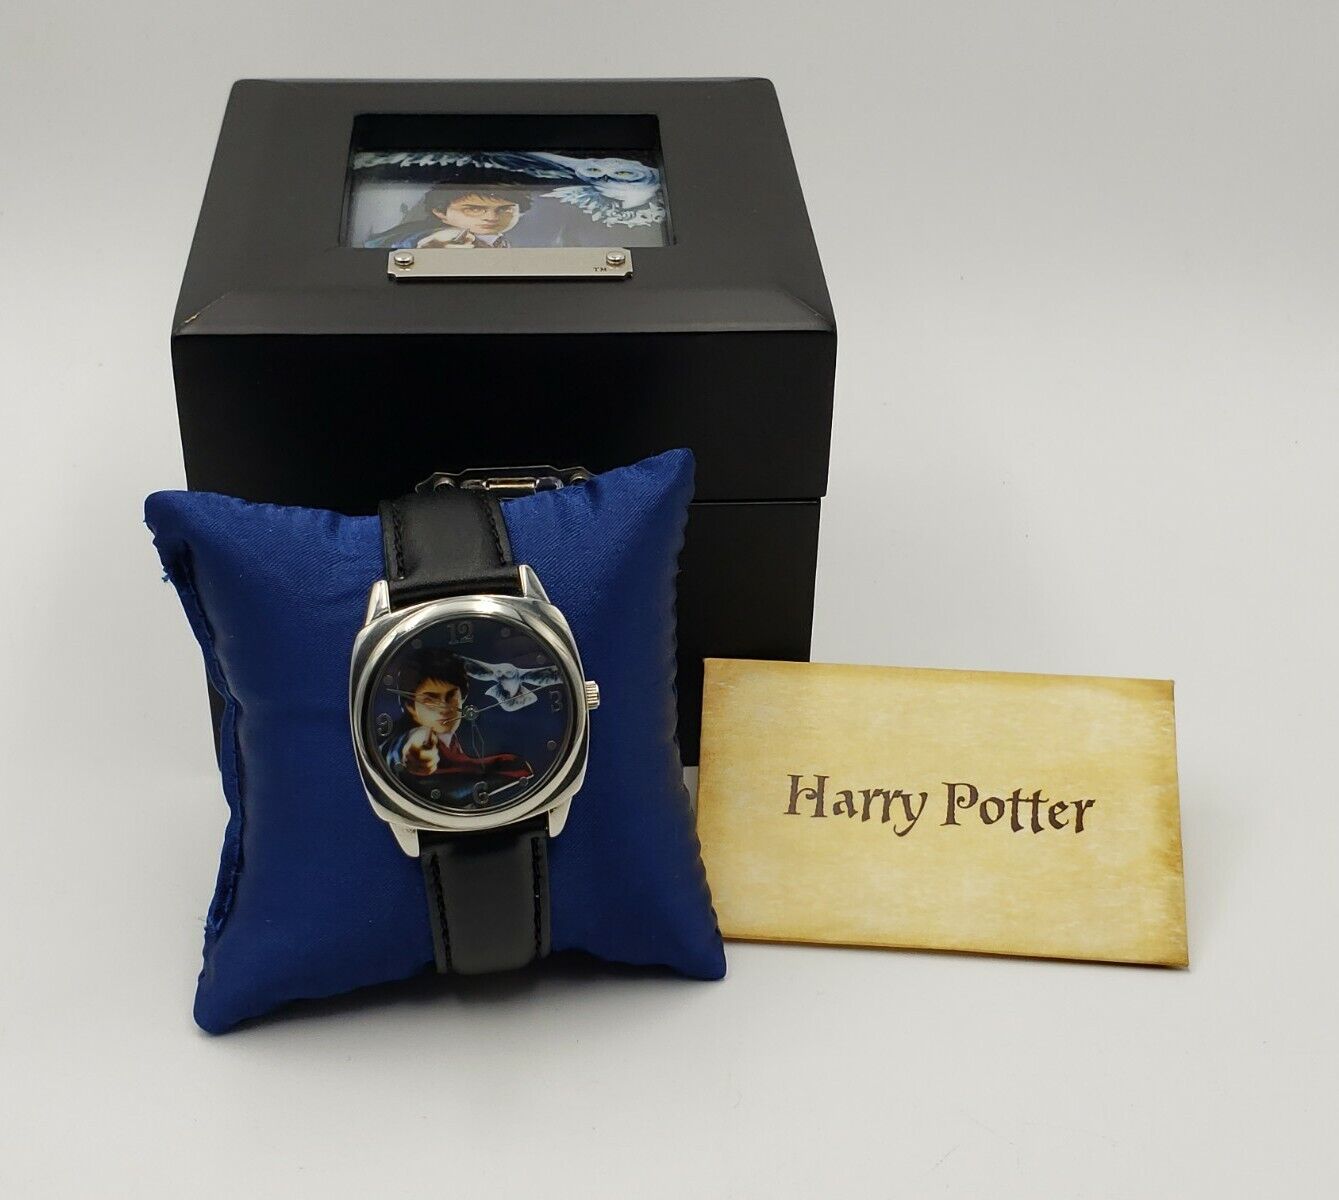 Harry Potter Limited Edition 500 Hedwig Goblet of Fire Watch NEW SII Seiko HTF